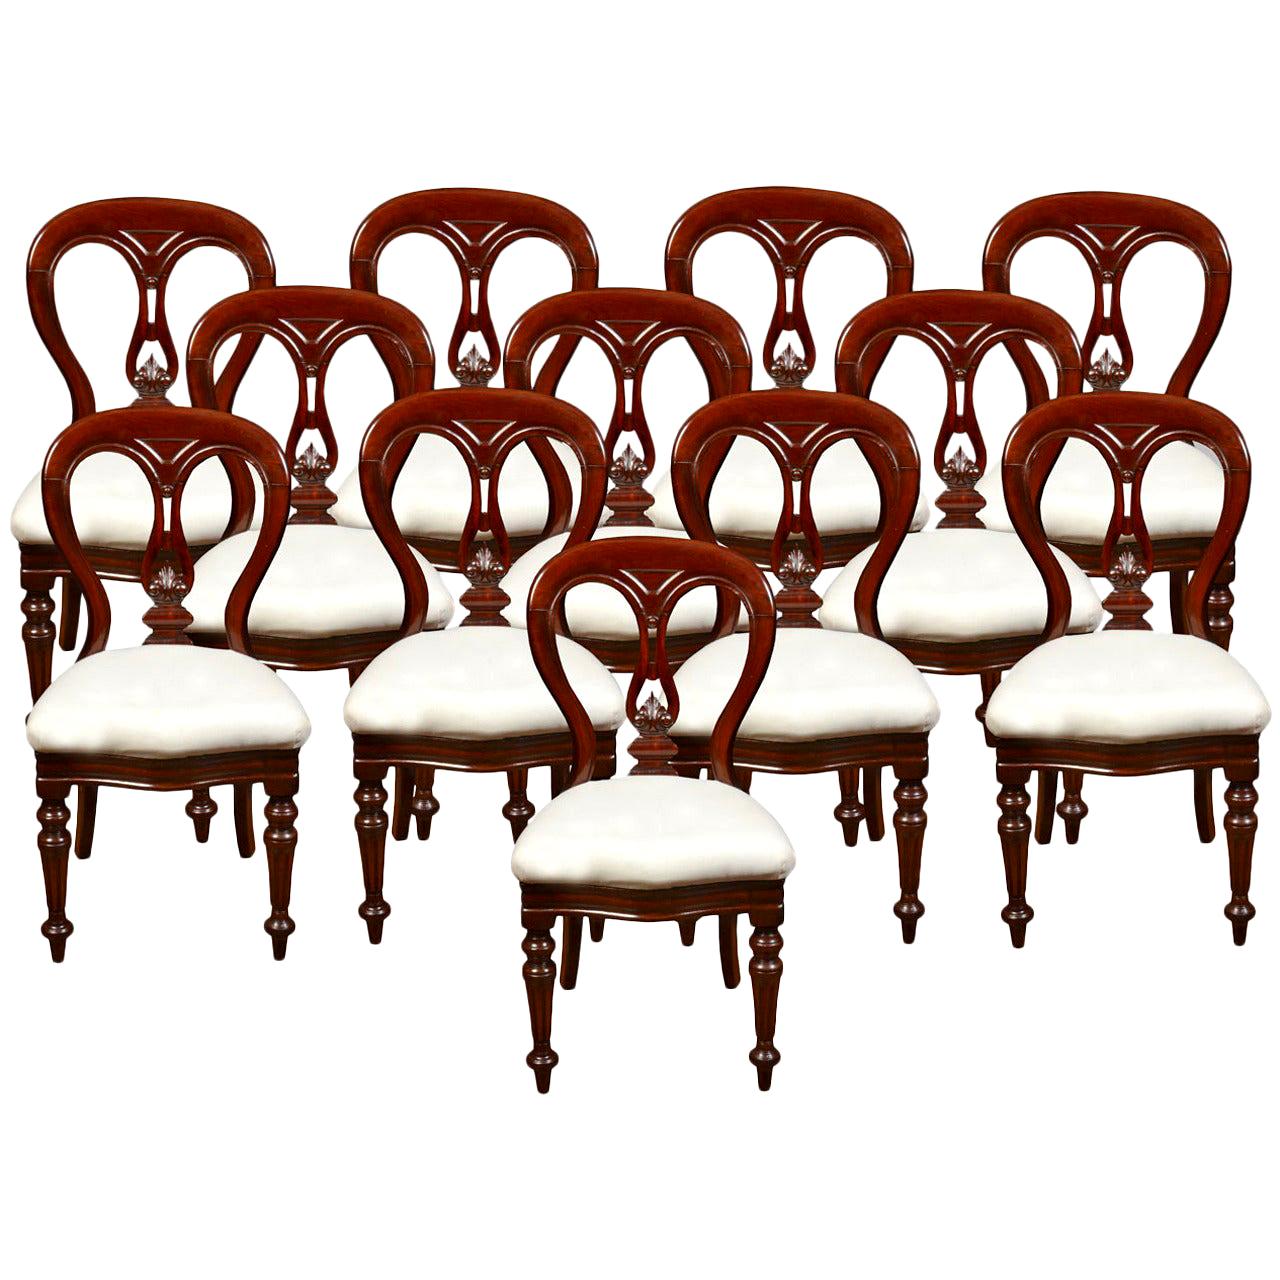 Set of 12 Mahogany Victorian Dining Chairs